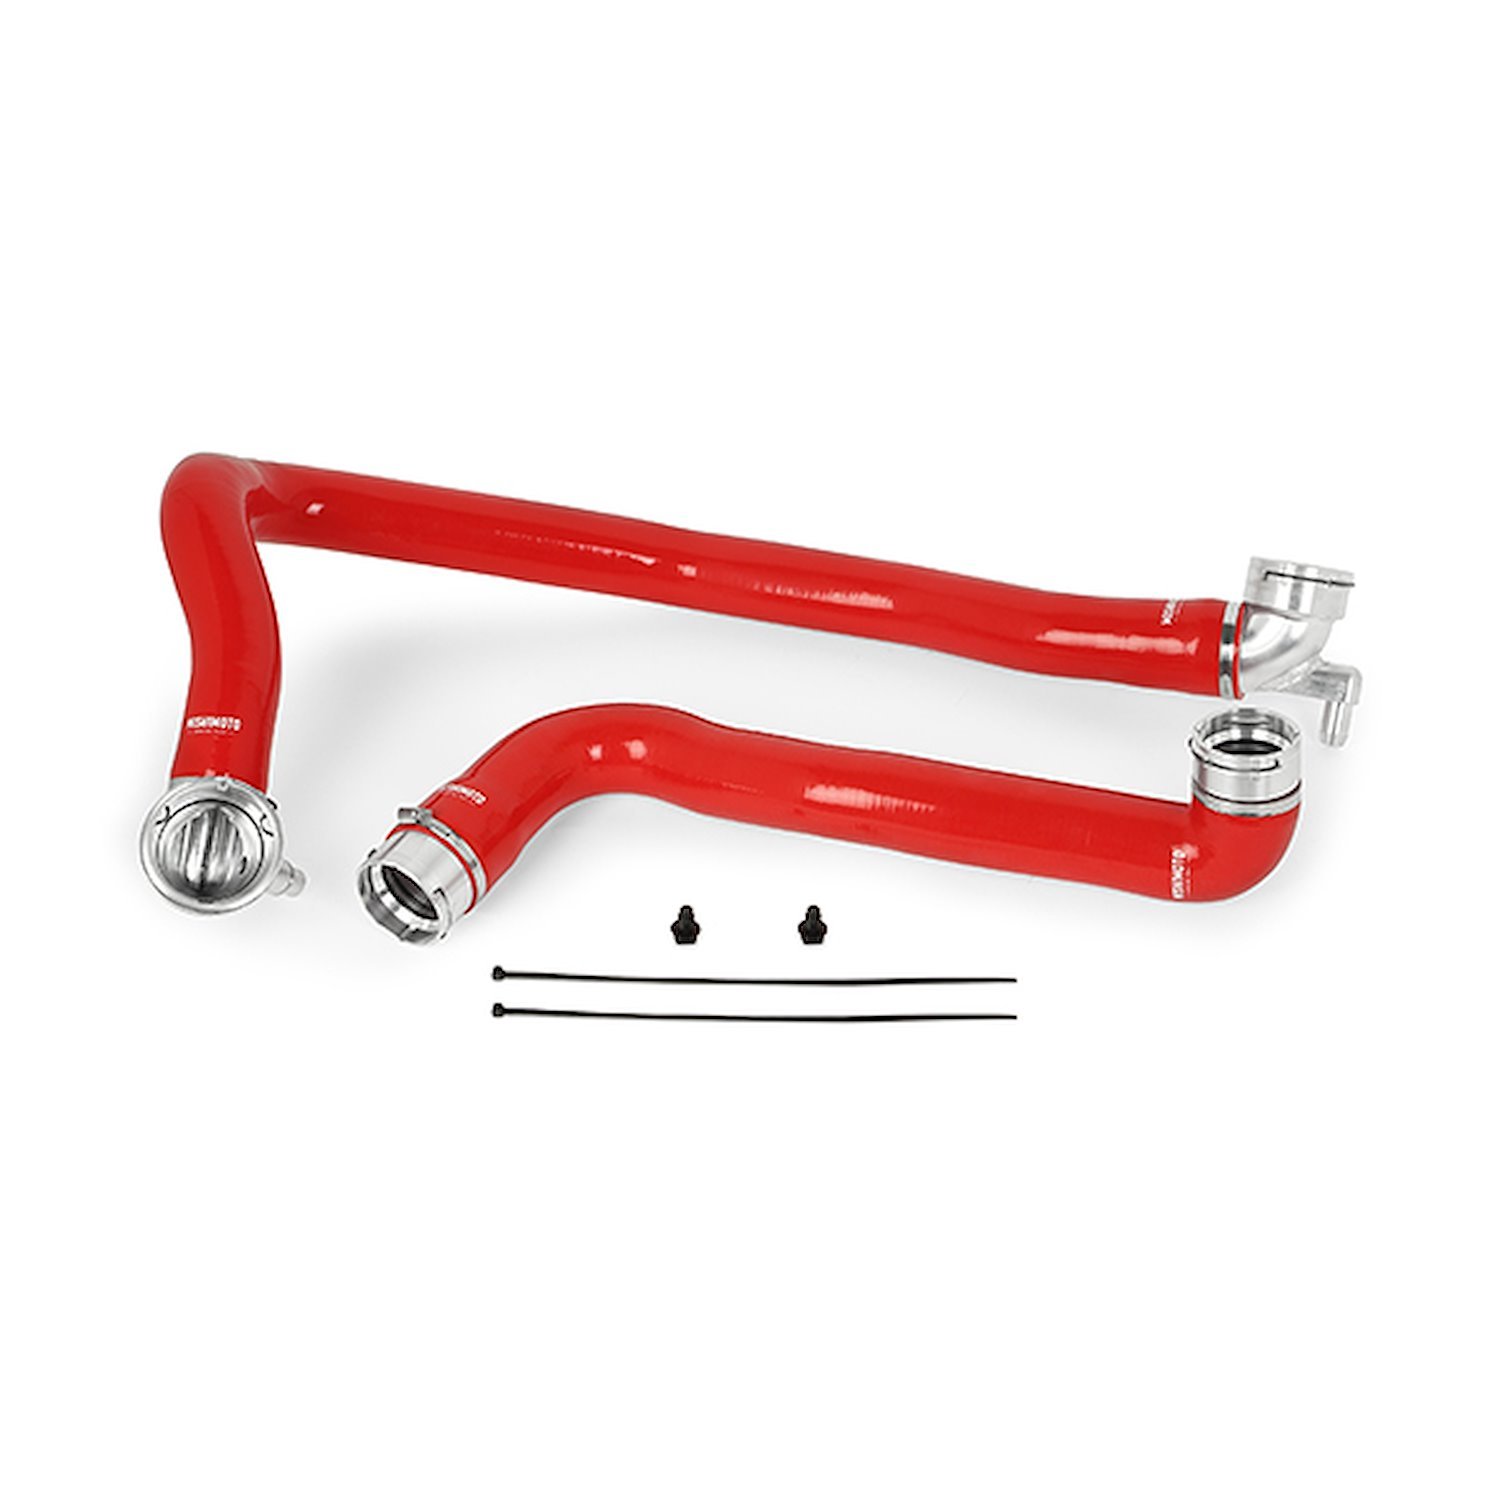 Silicone Radiator Hose Kit for 2011-2016 Ford 6.7L Powerstroke [Red]